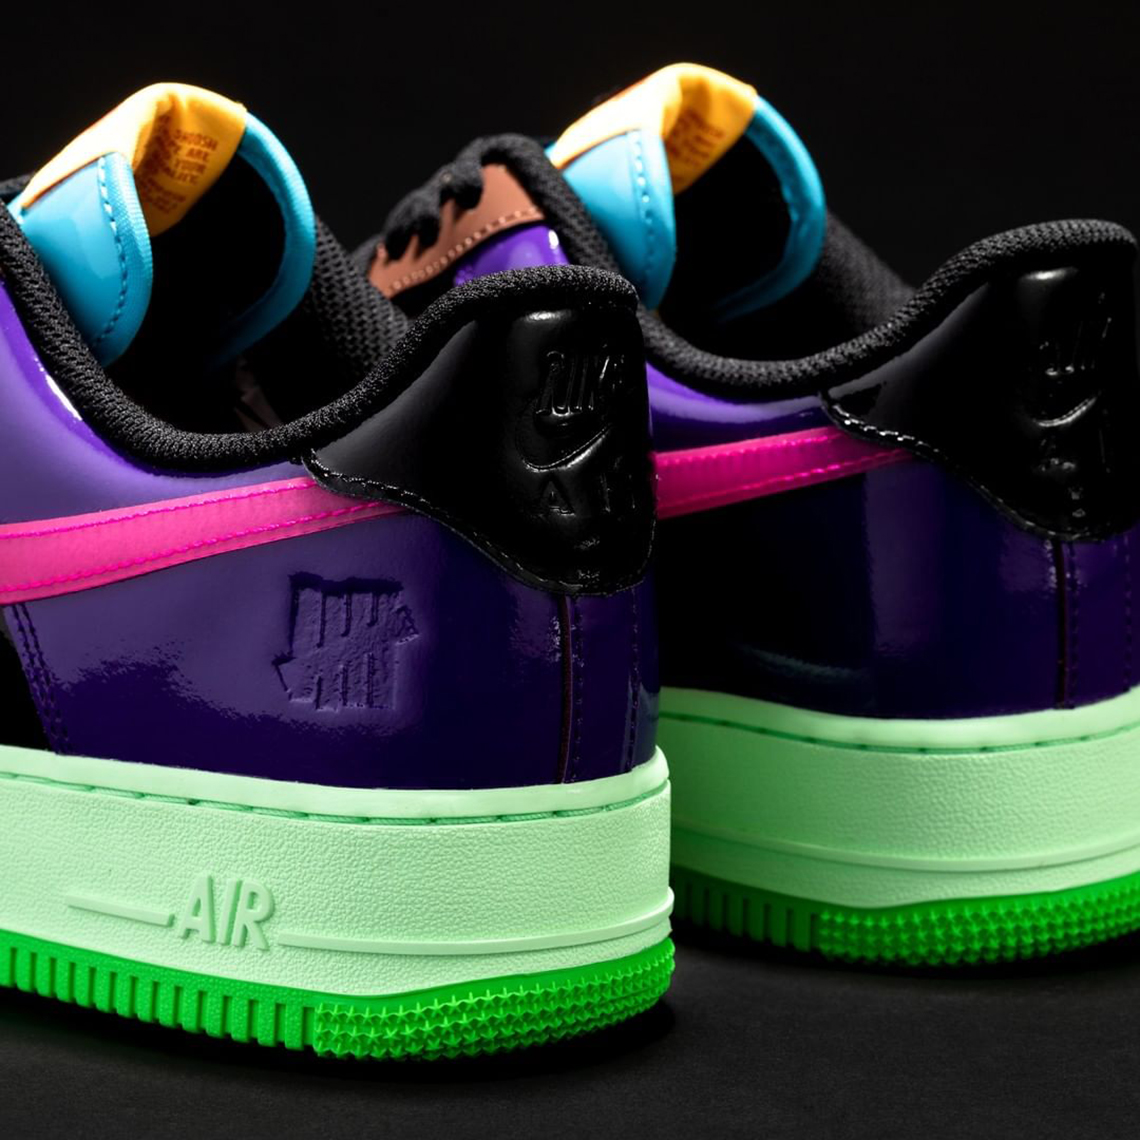 Undefeated Nike Air Force 1 Sp Pink Prime 1